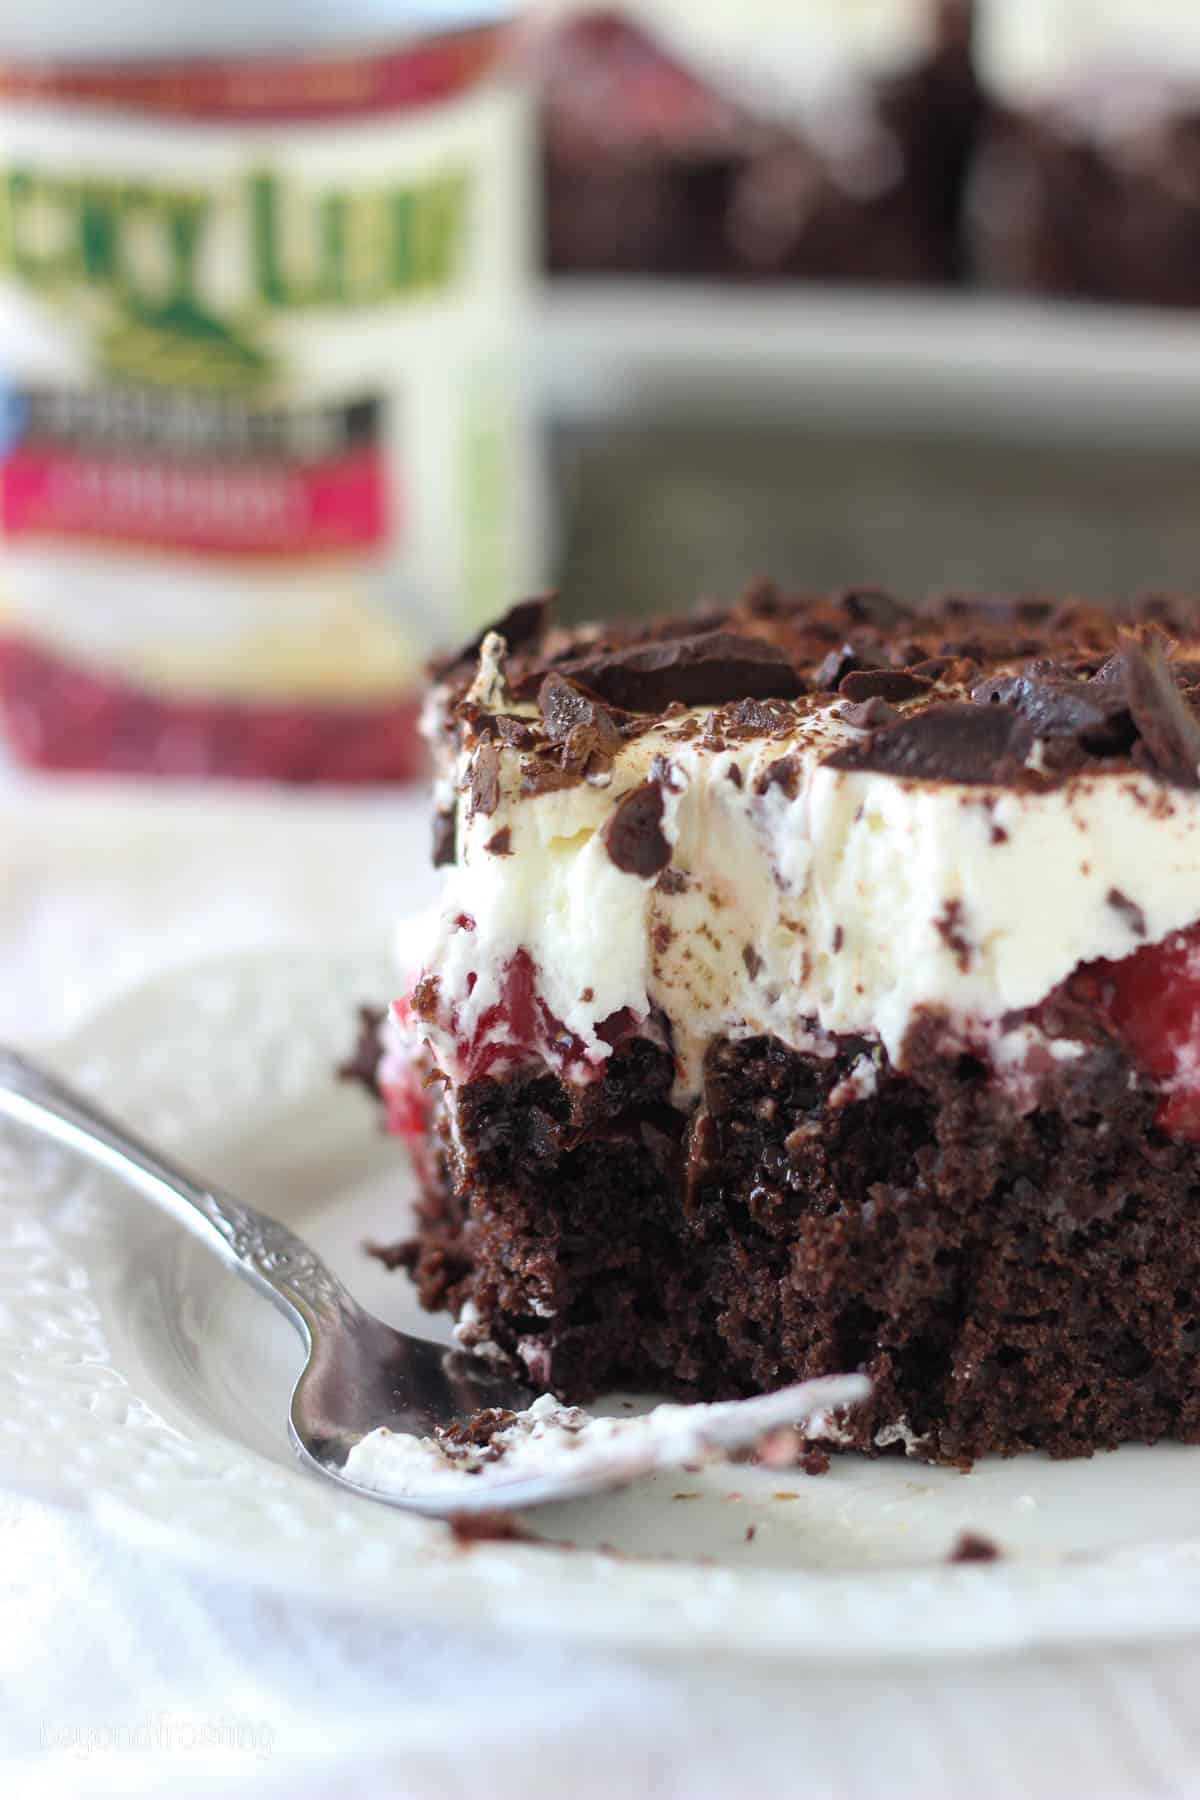 a slice of black forest cake with a bite taken out on a plate.